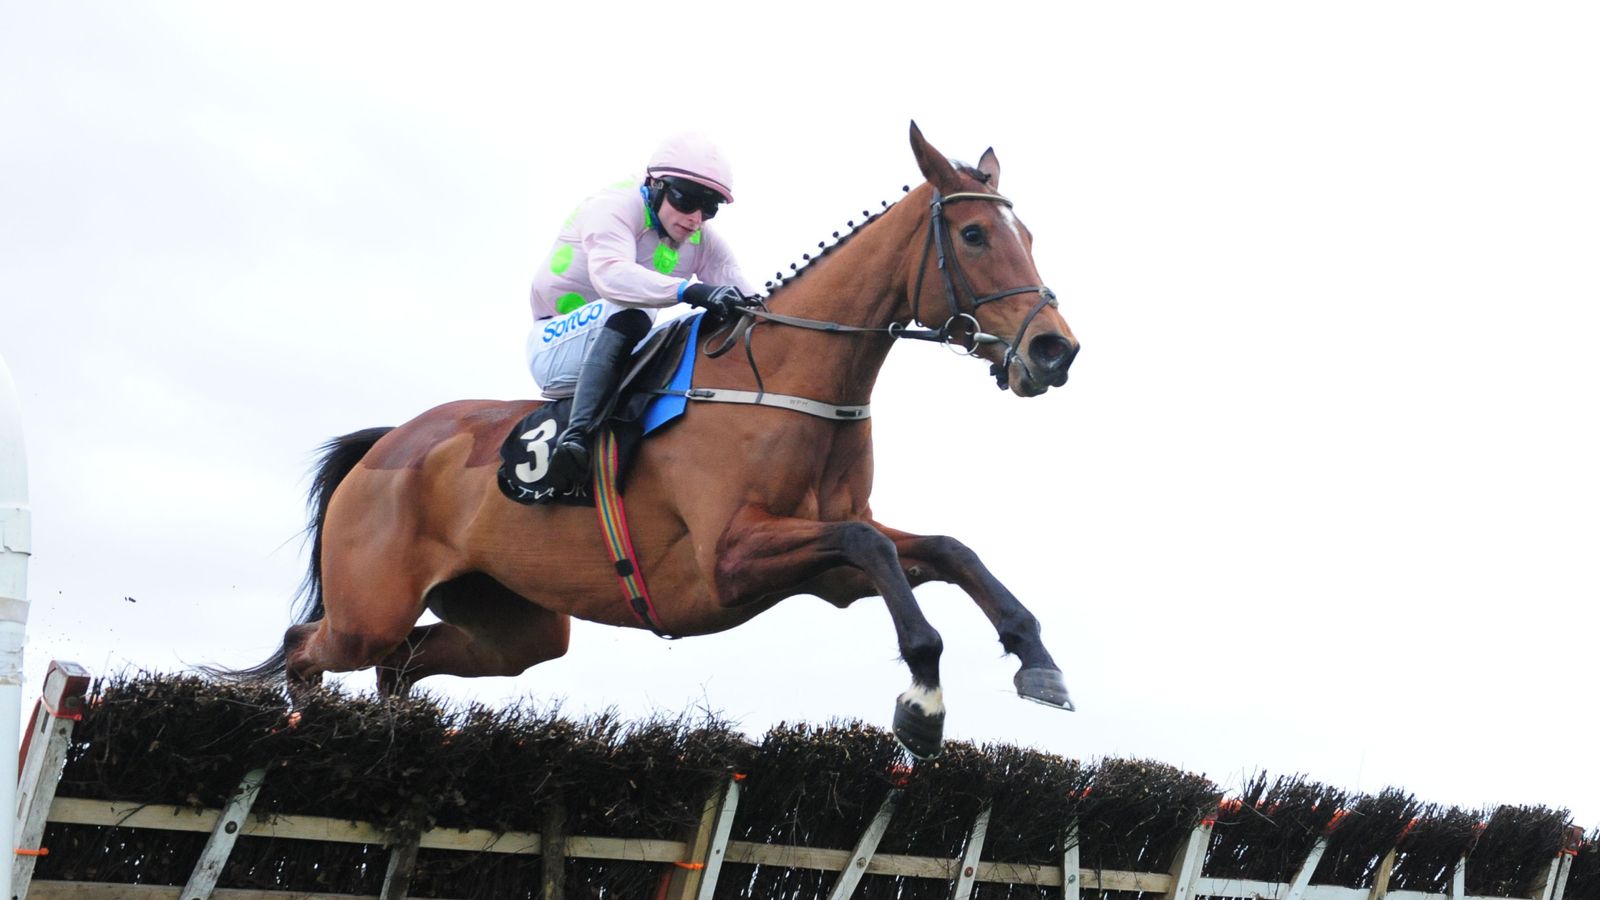 Cheltenham Festival: Former Mares’ Novices’ Hurdle favourite Allegorie De Vassy ruled out with injury